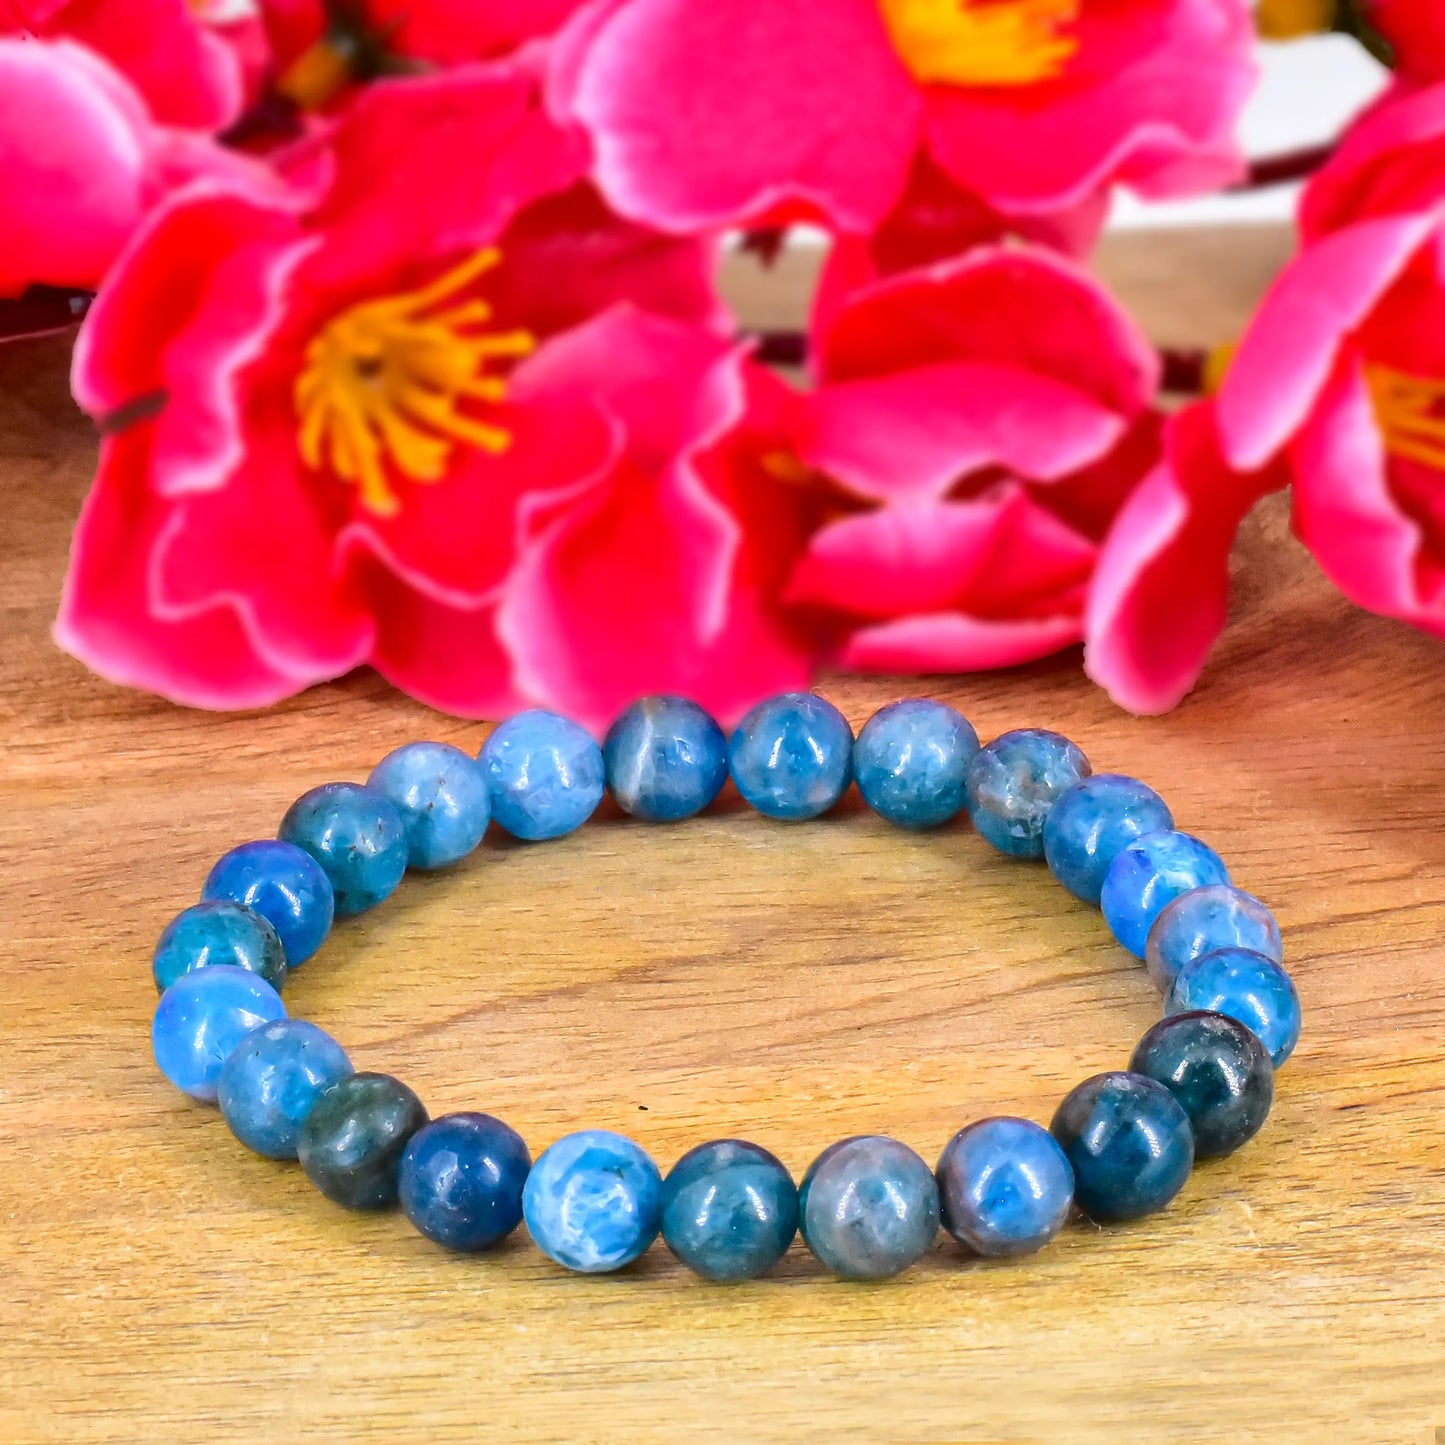 Reshamm Pre-Energized Unisex Premium Apatite Natural Crystal Stone Bracelet for Enhanced Learning, Mental Clarity and Motivation